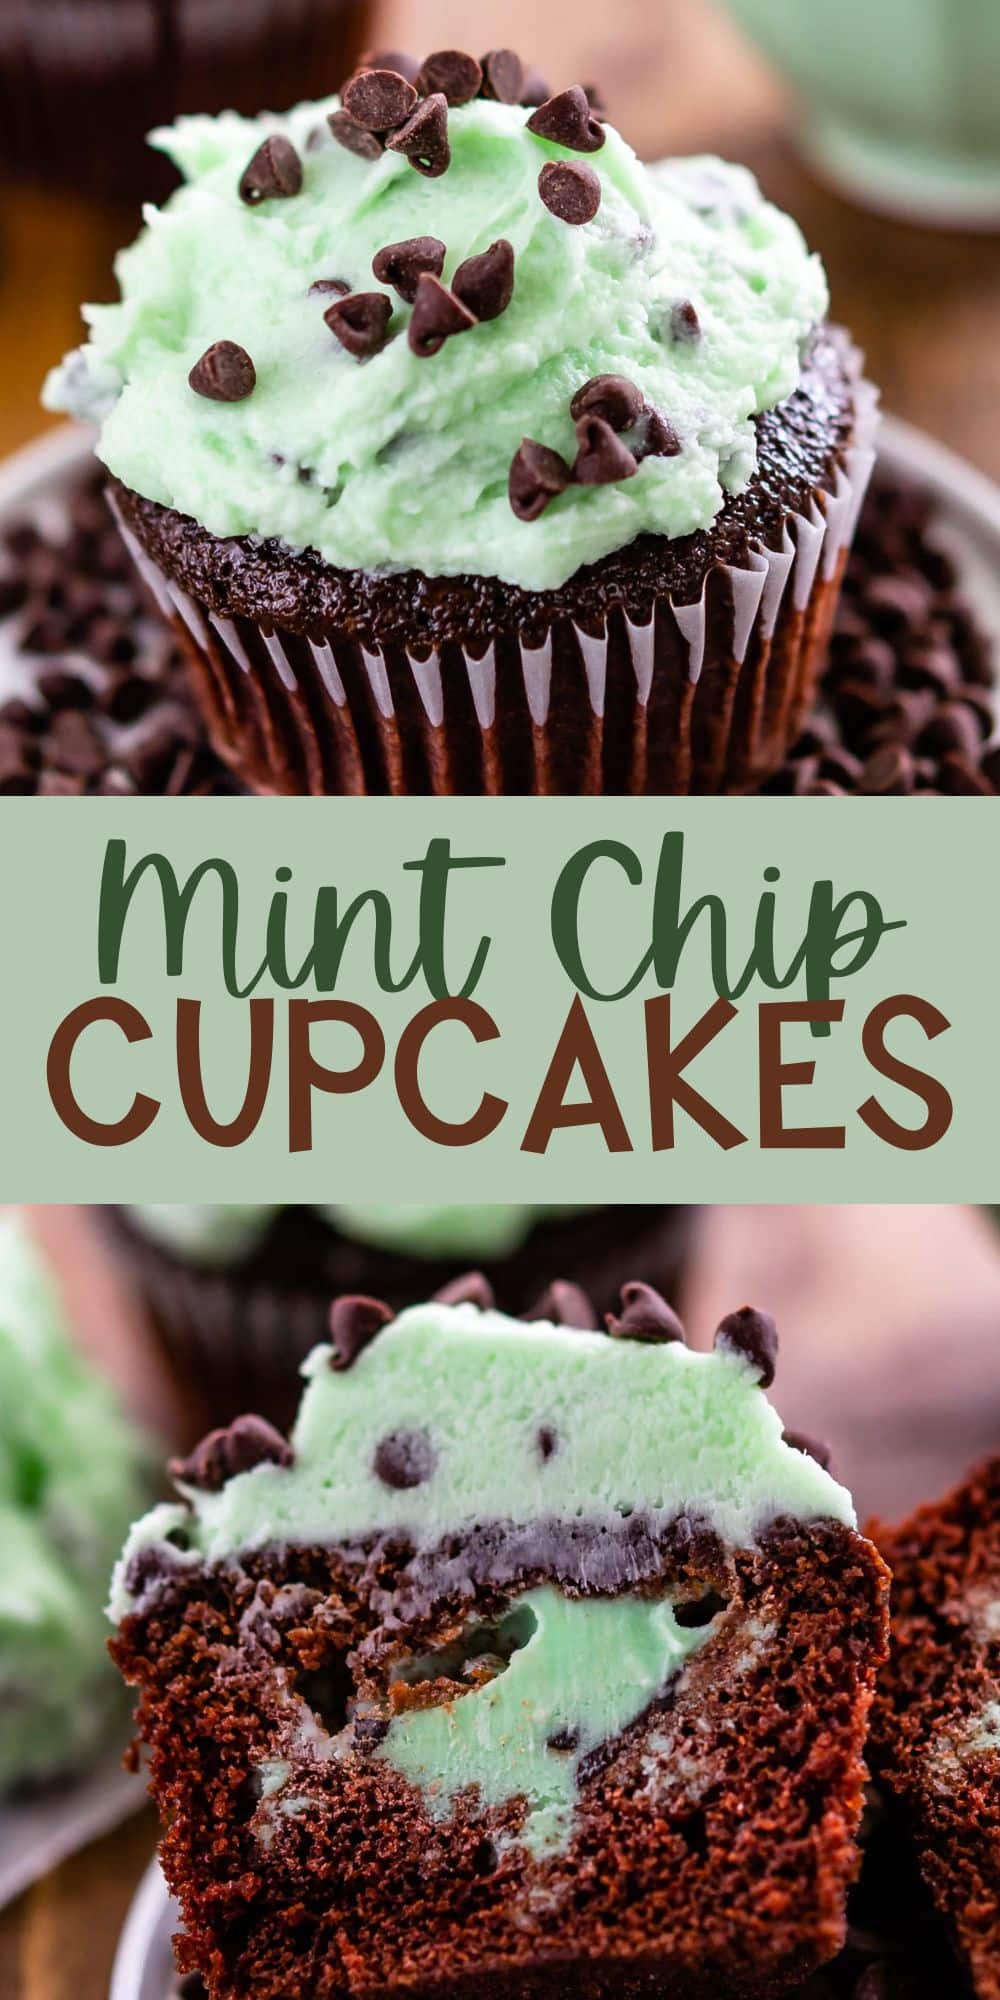 two photos of chocolate cupcakes with green mint frosting on top and in the center of the cupcake with words on the photo.